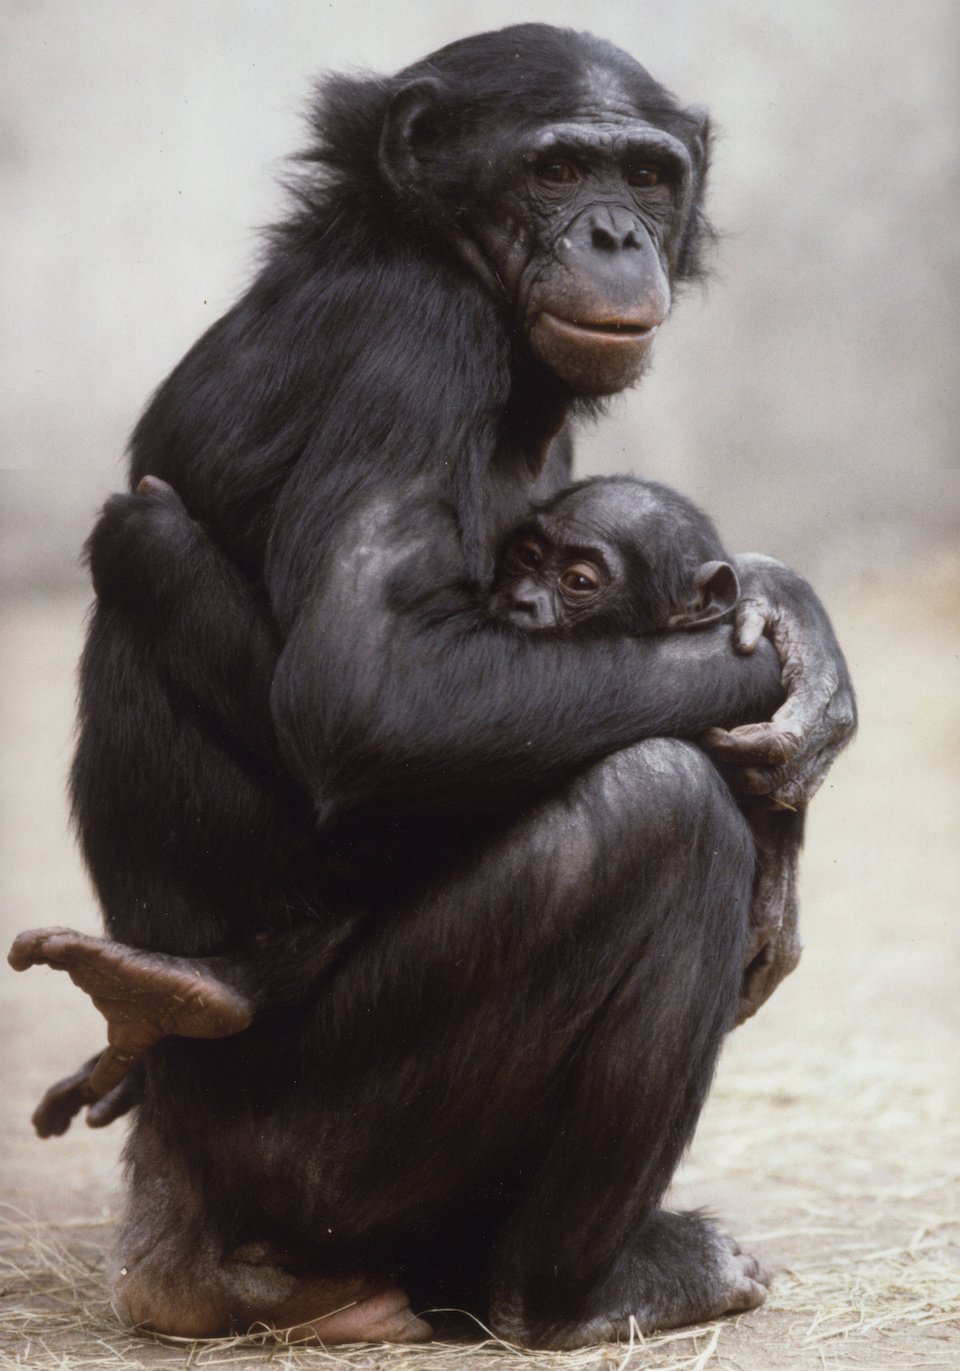 Matata with her adopted son, Kanzi